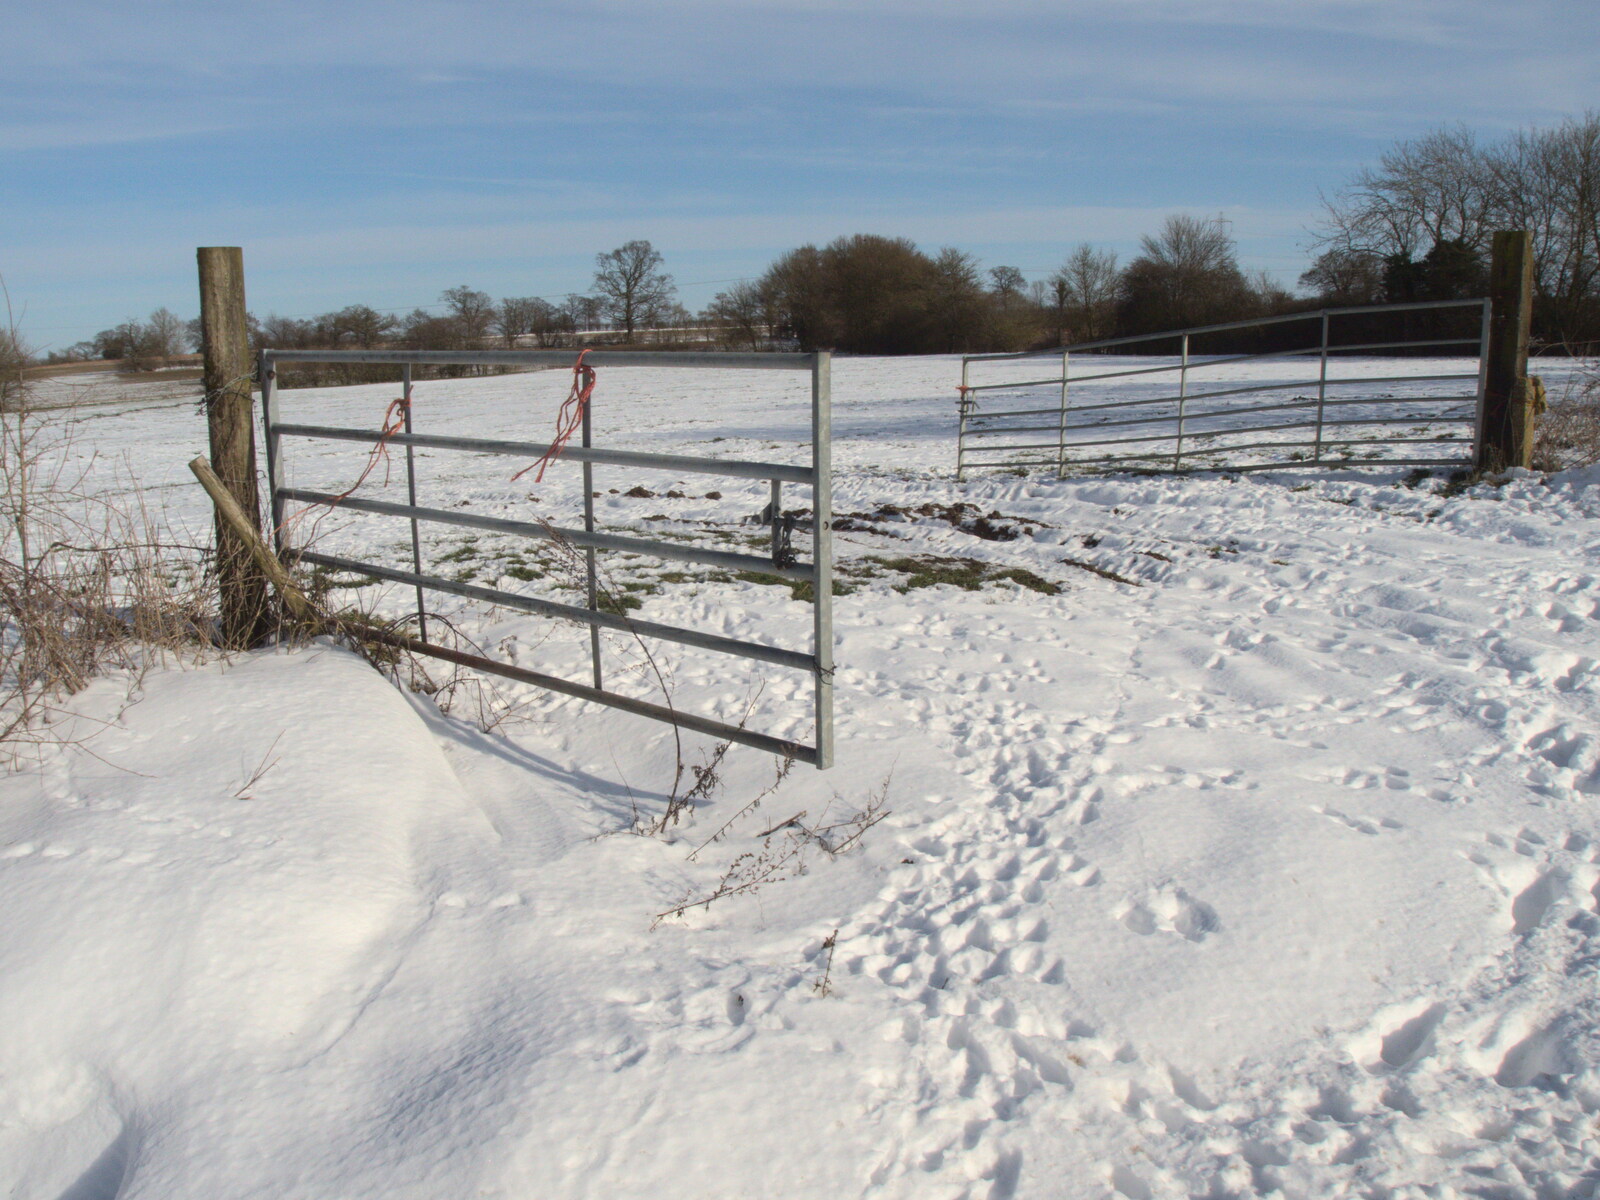 An open gate from Derelict Infants School and Ice Sculptures, Diss and Palgrave, Norfolk and Suffolk - 13th February 2021